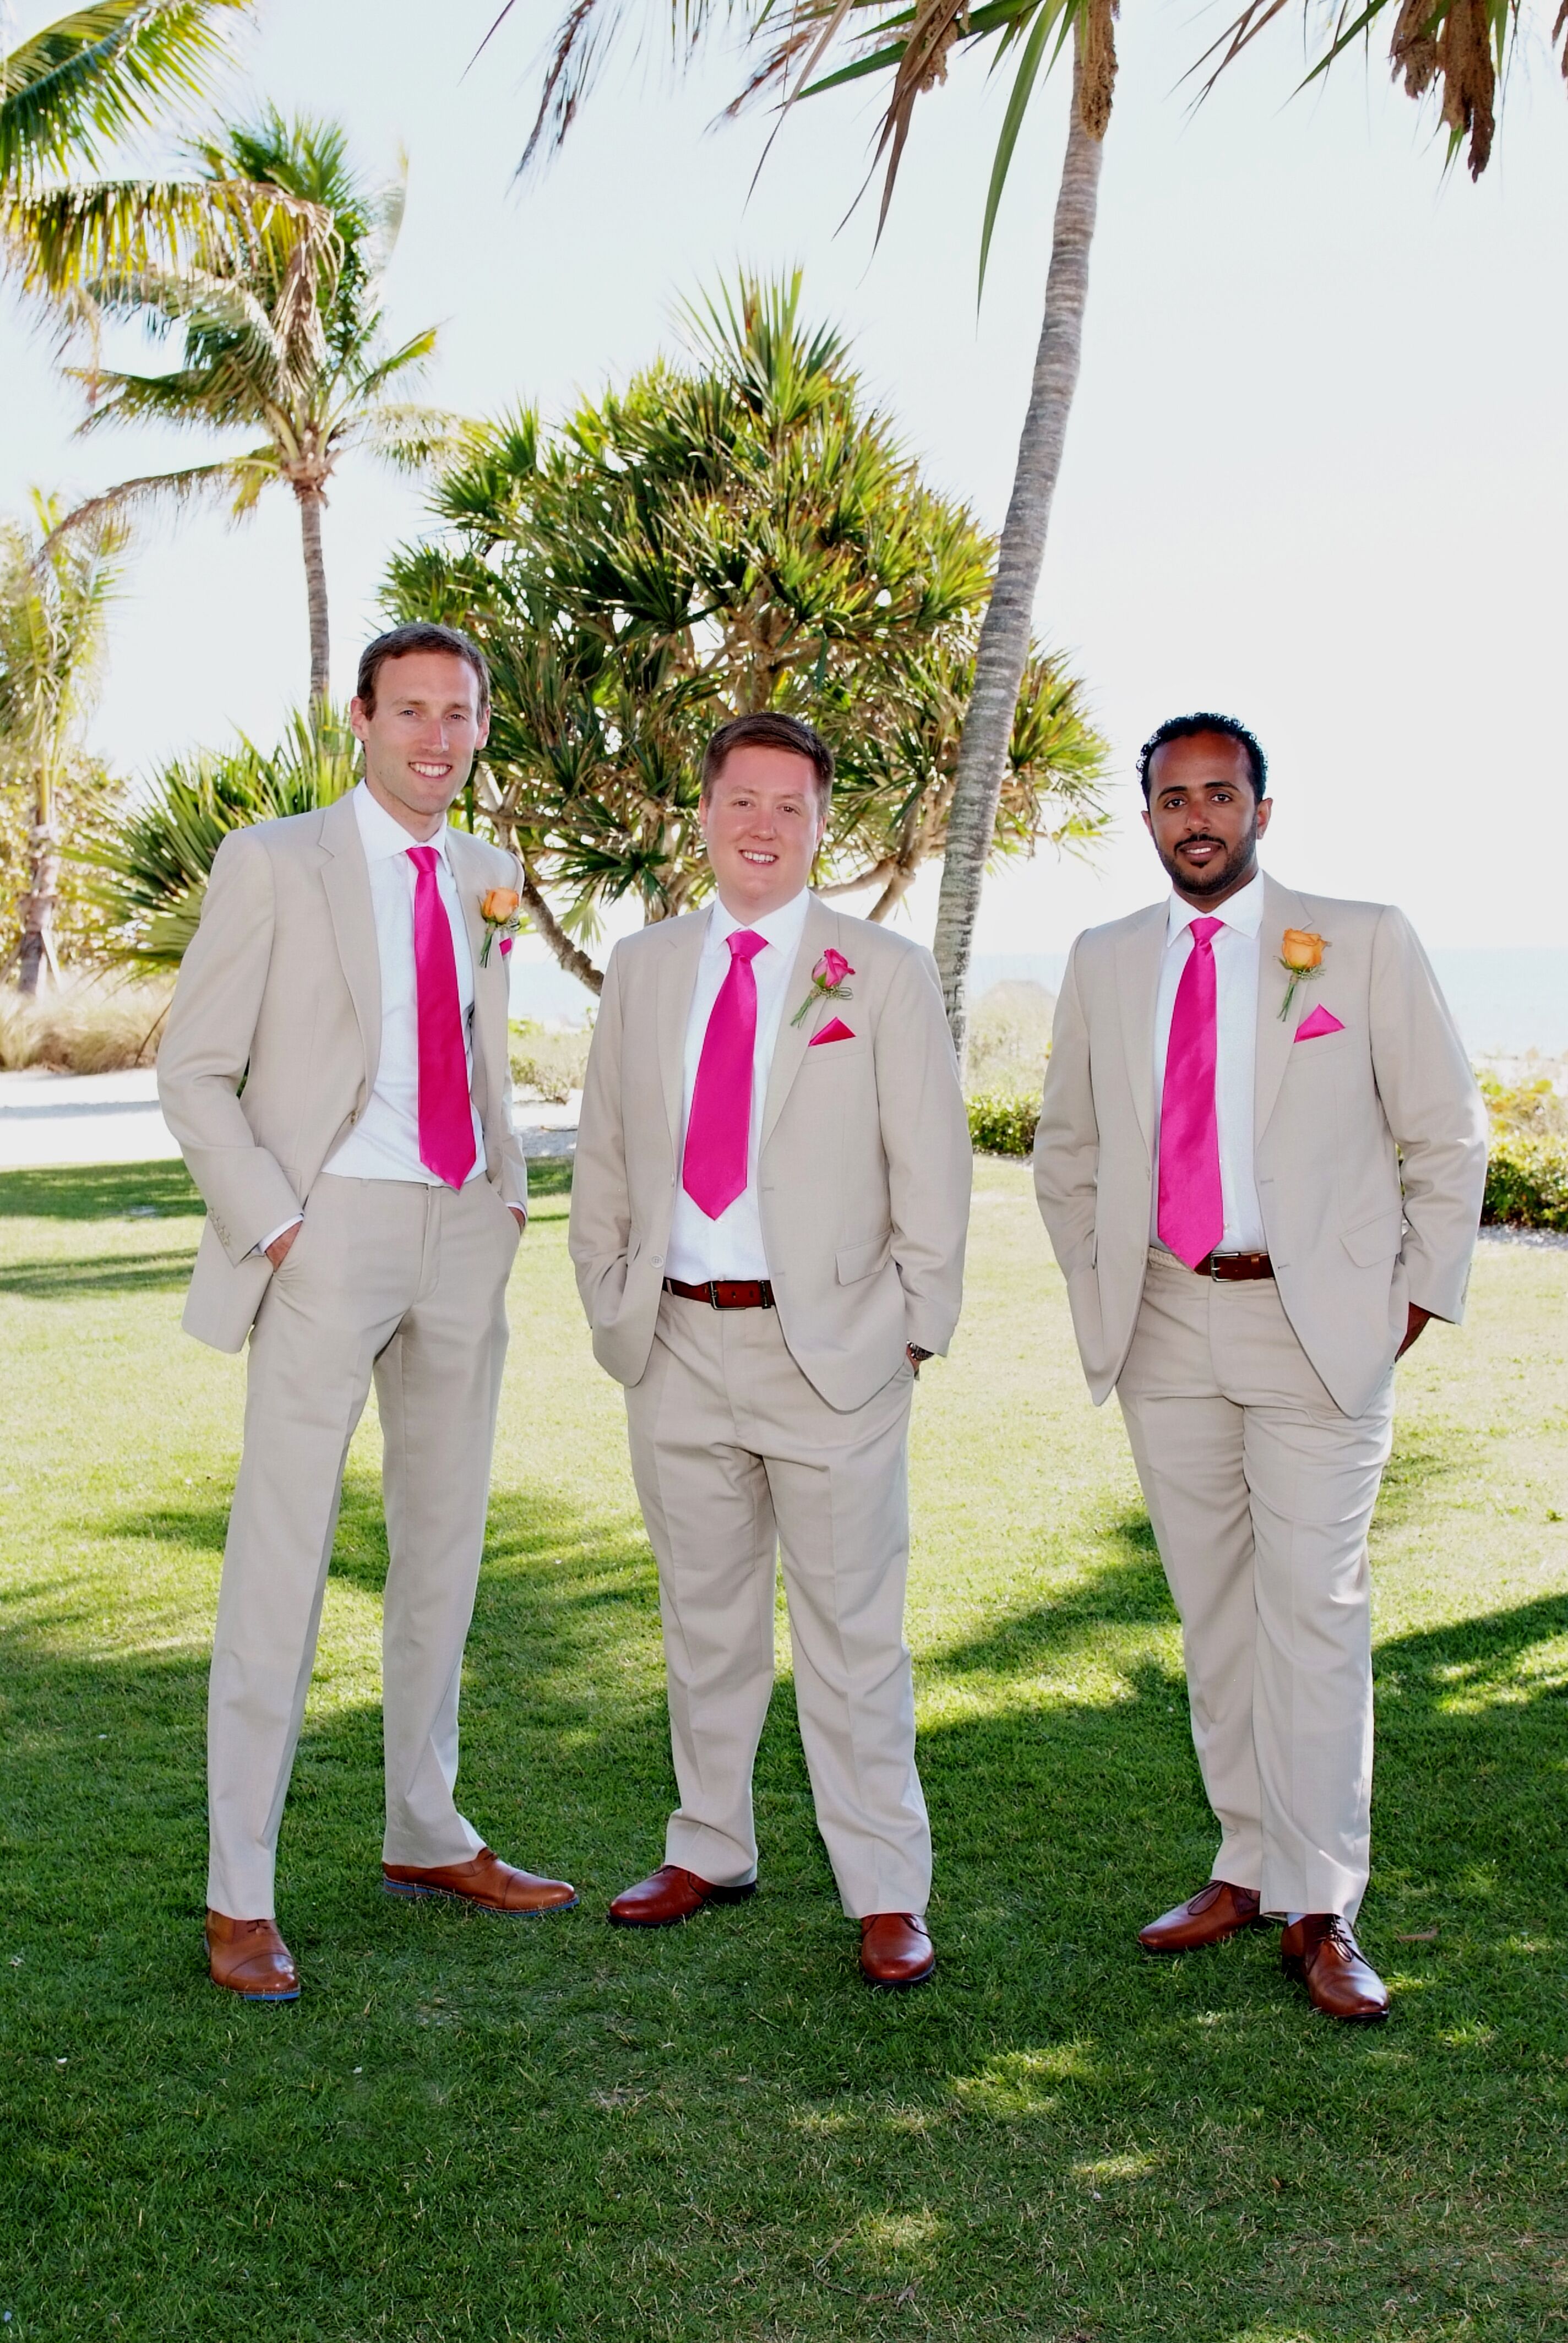 Neutral Groomsmen Suits with Fuchsia Ties